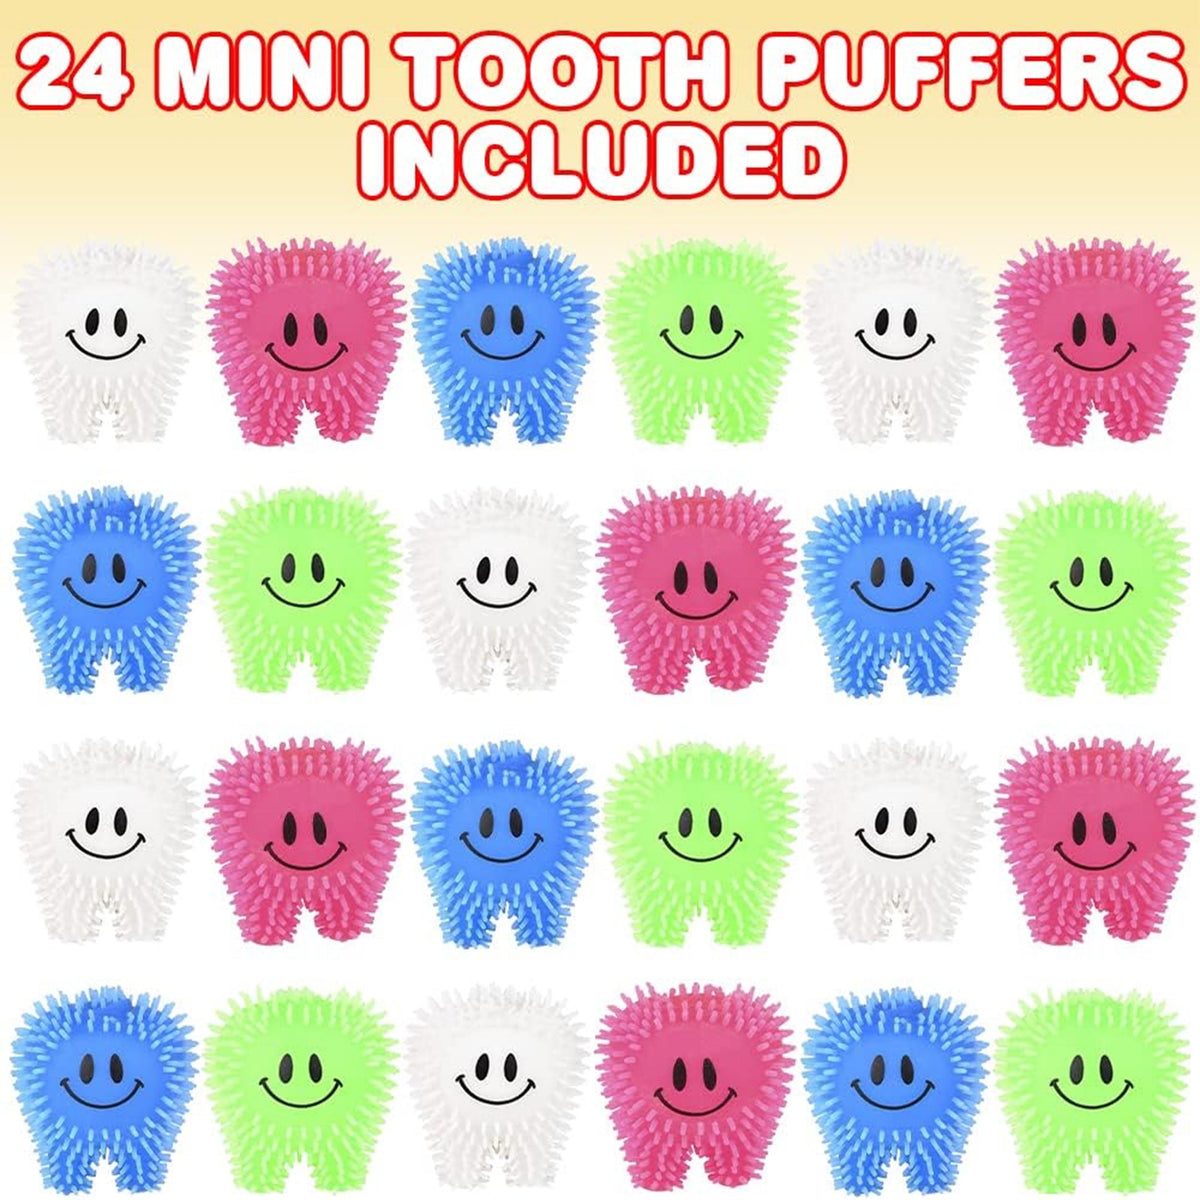 Mini Tooth Puffers kids Toys In Bulk- Assorted